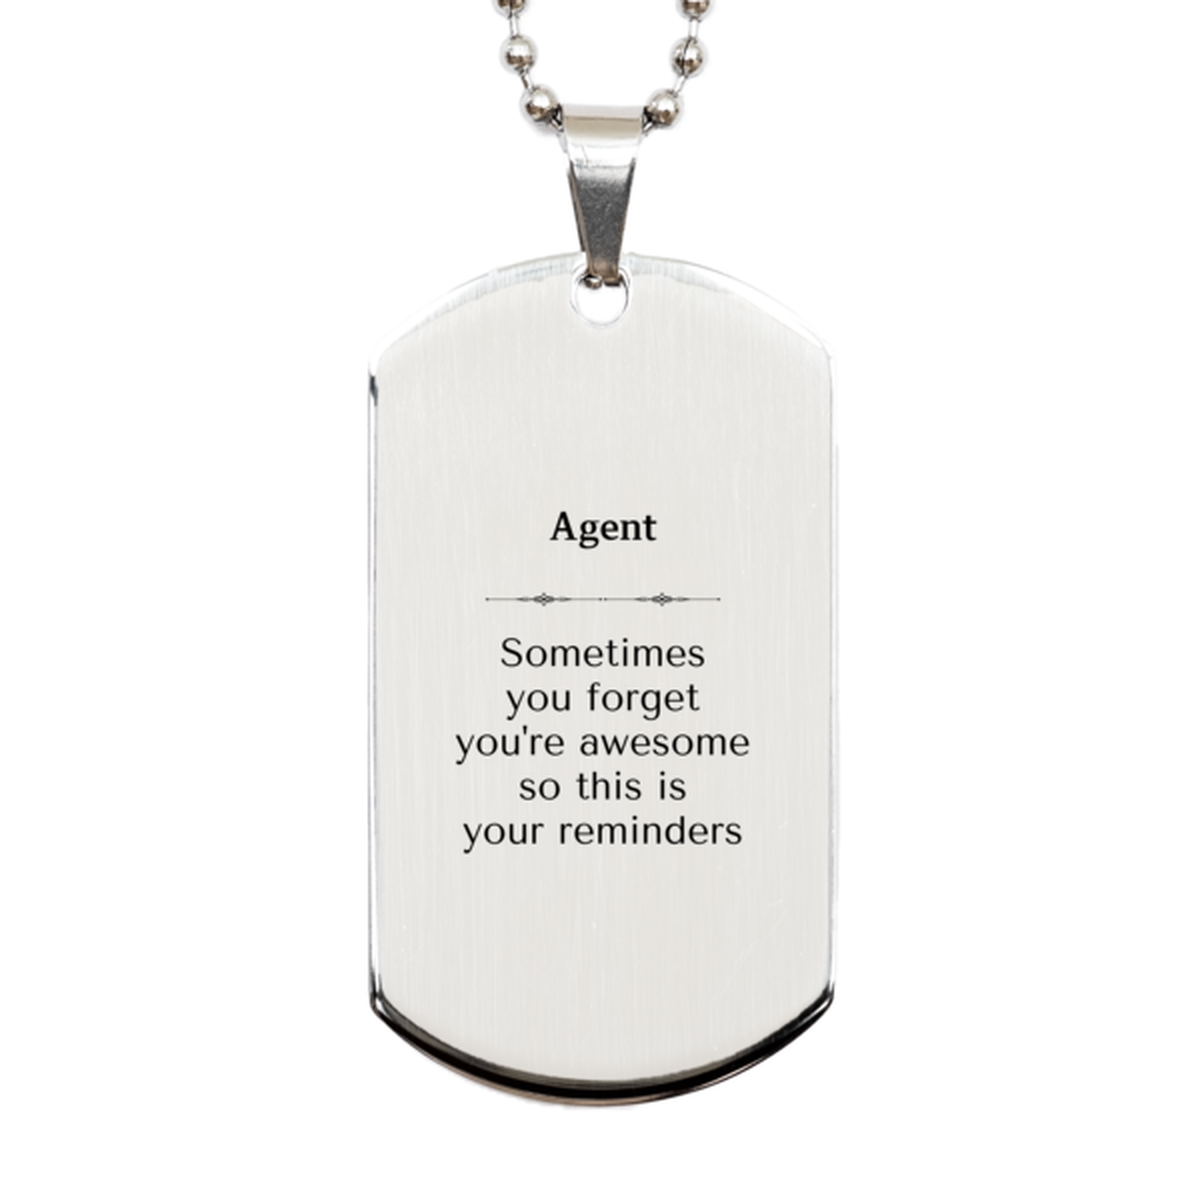 Sentimental Agent Silver Dog Tag, Agent Sometimes you forget you're awesome so this is your reminders, Graduation Christmas Birthday Gifts for Agent, Men, Women, Coworkers